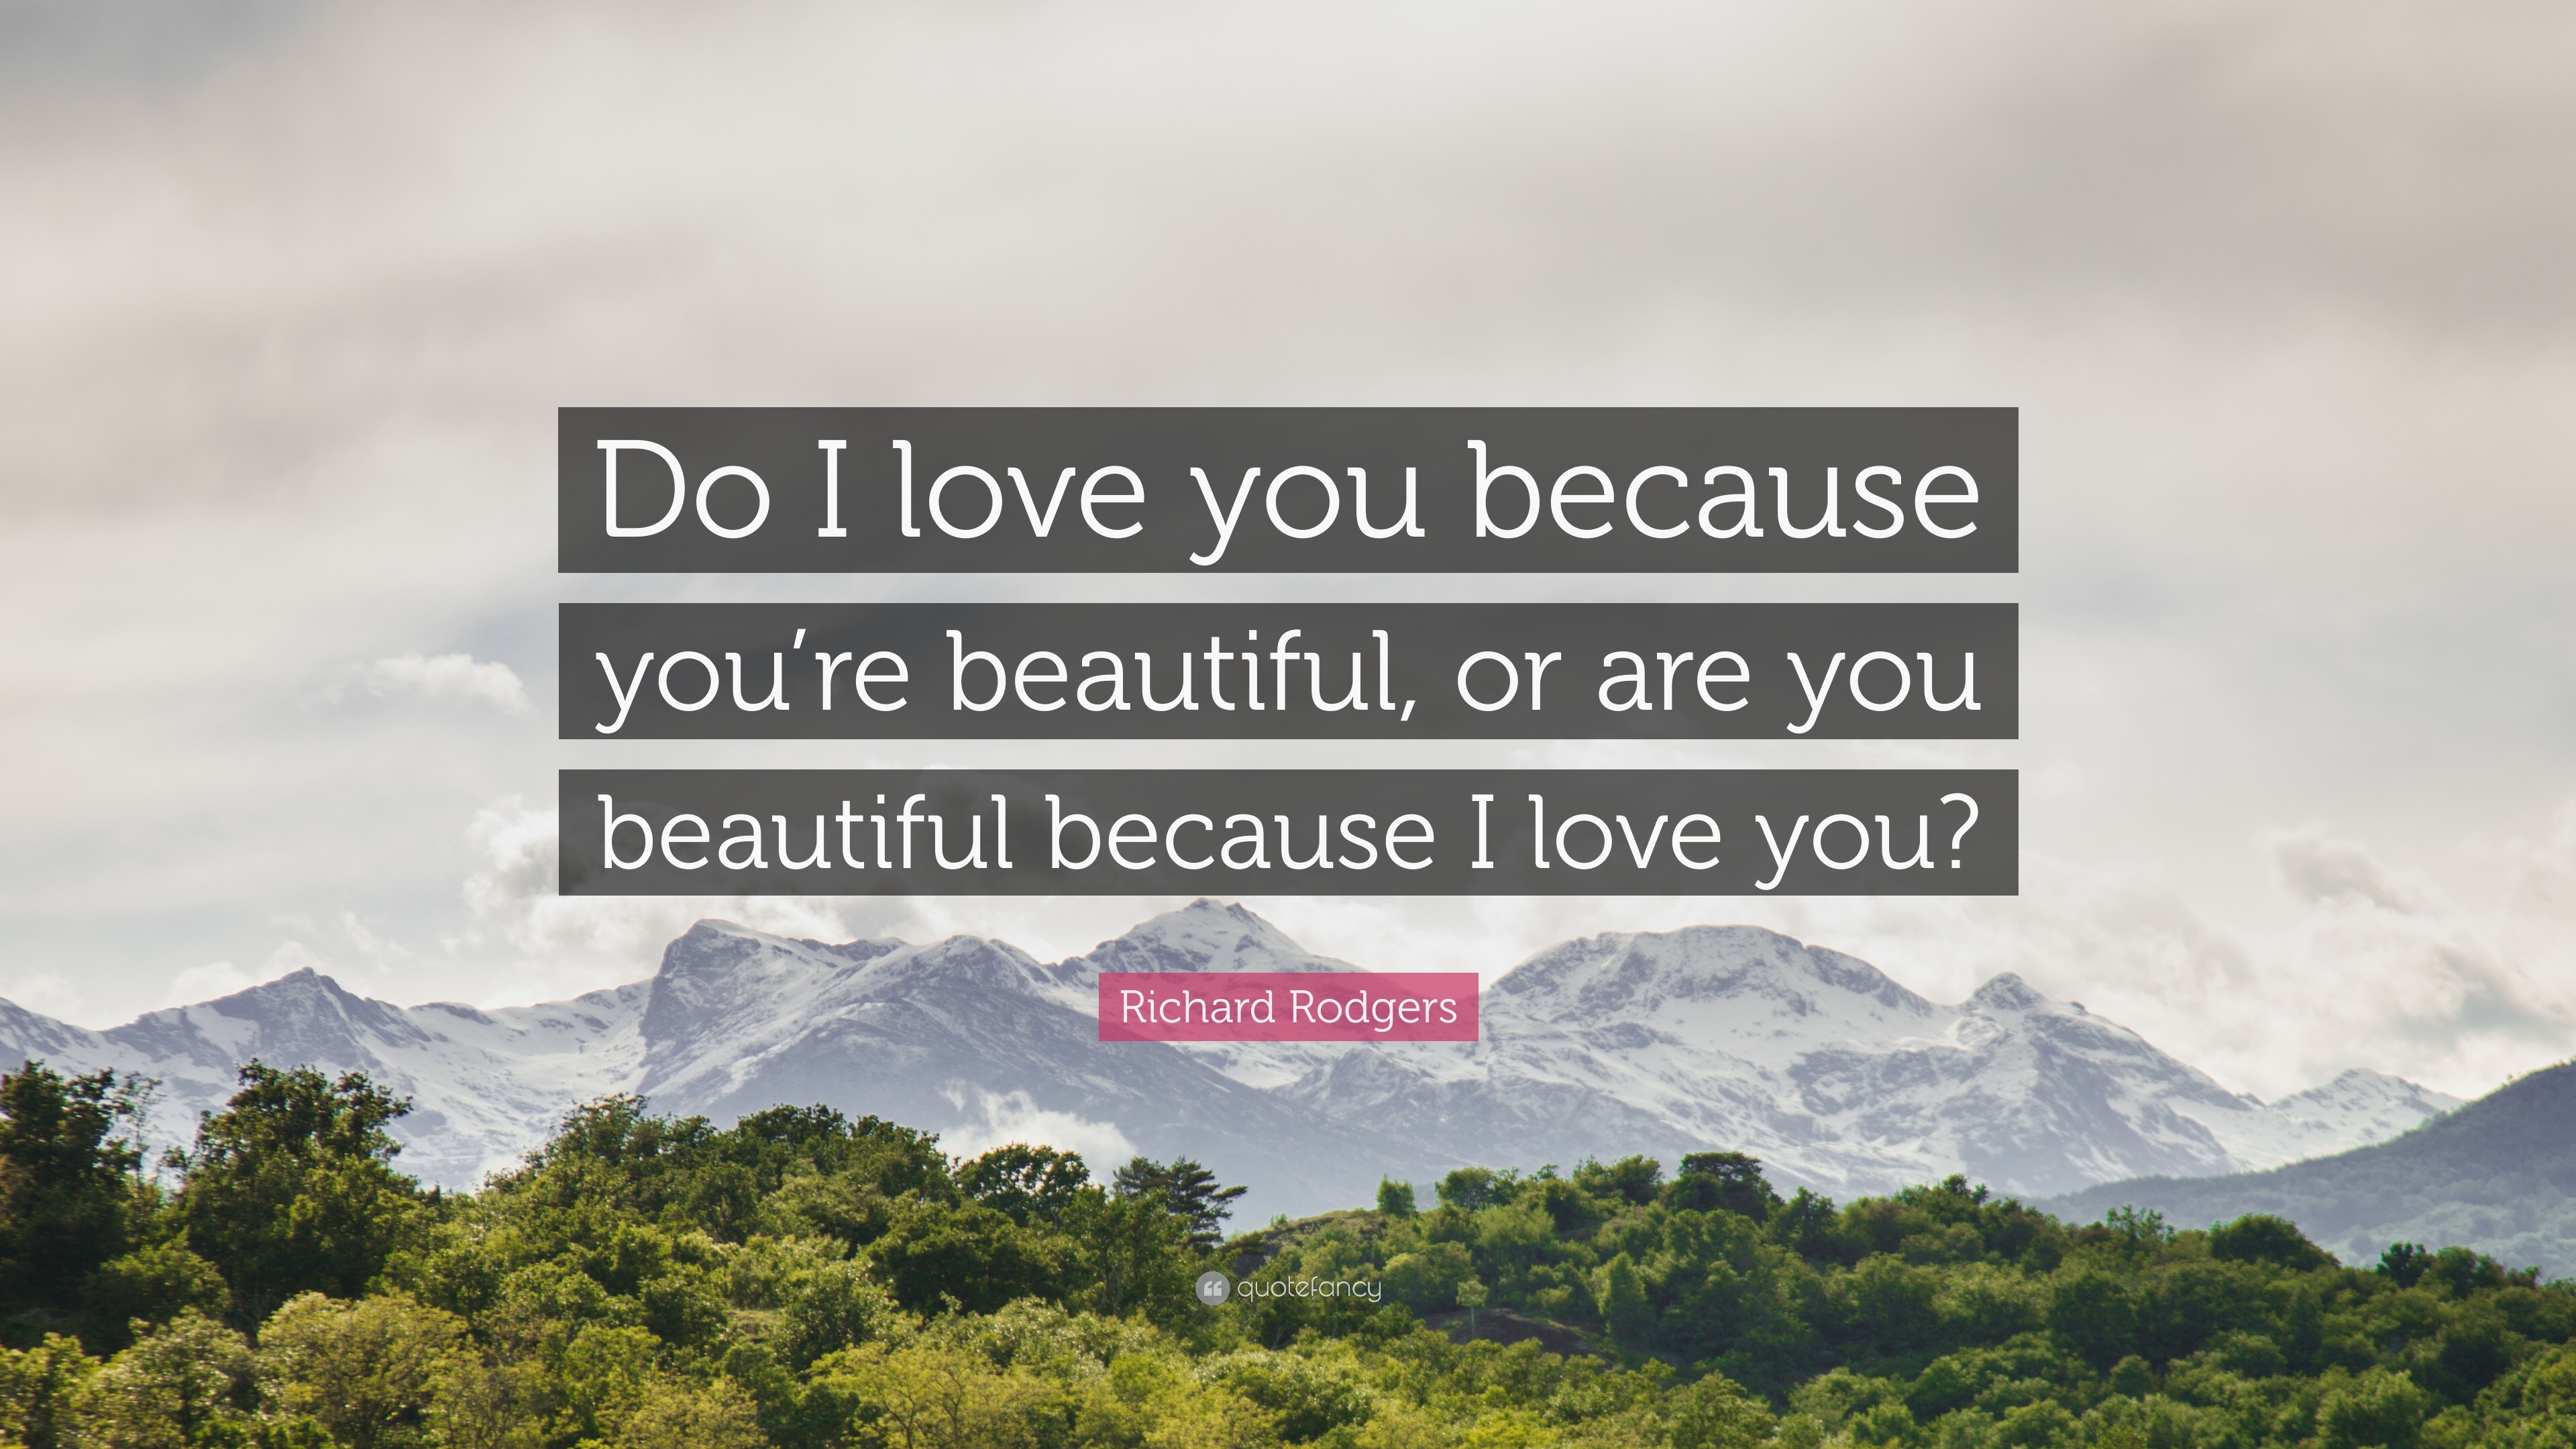 Richard Rodgers Quote “Do I love you because you re beautiful or